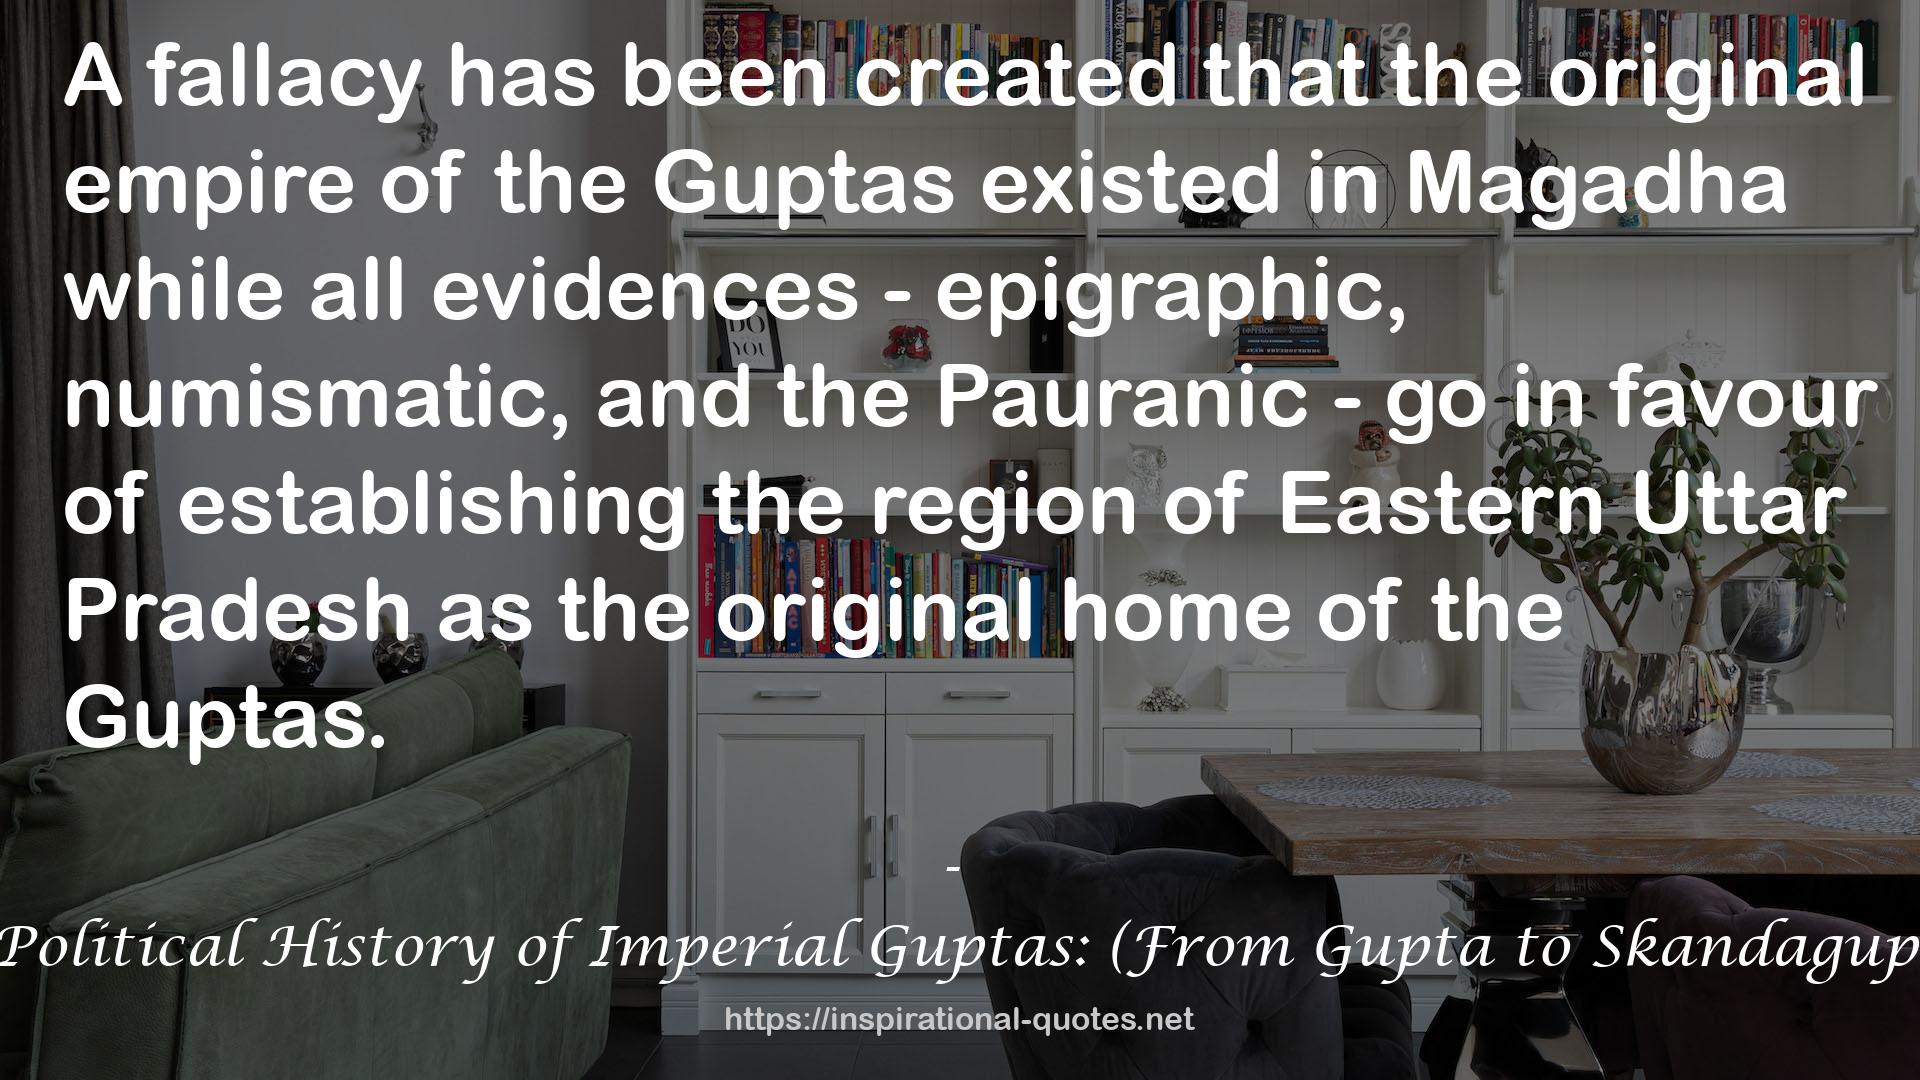 A Political History of Imperial Guptas: (From Gupta to Skandagupta) QUOTES